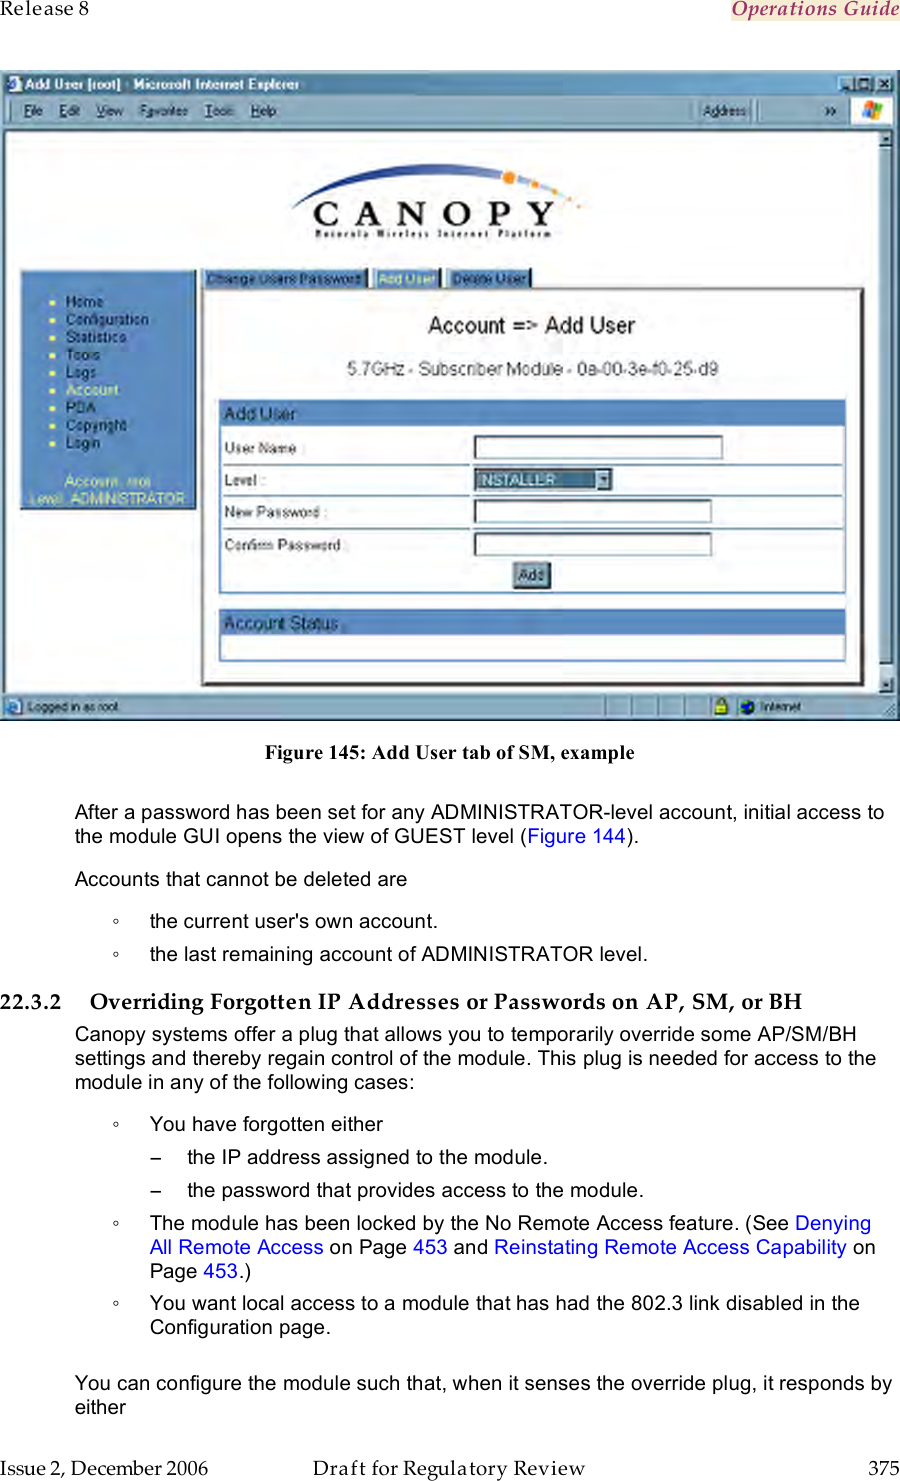 Release 8    Operations Guide   Issue 2, December 2006  Draft for Regulatory Review  375      Figure 145: Add User tab of SM, example  After a password has been set for any ADMINISTRATOR-level account, initial access to the module GUI opens the view of GUEST level (Figure 144).  Accounts that cannot be deleted are ◦  the current user&apos;s own account. ◦  the last remaining account of ADMINISTRATOR level. 22.3.2 Overriding Forgotten IP Addresses or Passwords on AP, SM, or BH Canopy systems offer a plug that allows you to temporarily override some AP/SM/BH settings and thereby regain control of the module. This plug is needed for access to the module in any of the following cases: ◦  You have forgotten either −  the IP address assigned to the module. −  the password that provides access to the module. ◦  The module has been locked by the No Remote Access feature. (See Denying All Remote Access on Page 453 and Reinstating Remote Access Capability on Page 453.) ◦  You want local access to a module that has had the 802.3 link disabled in the Configuration page.  You can configure the module such that, when it senses the override plug, it responds by either 